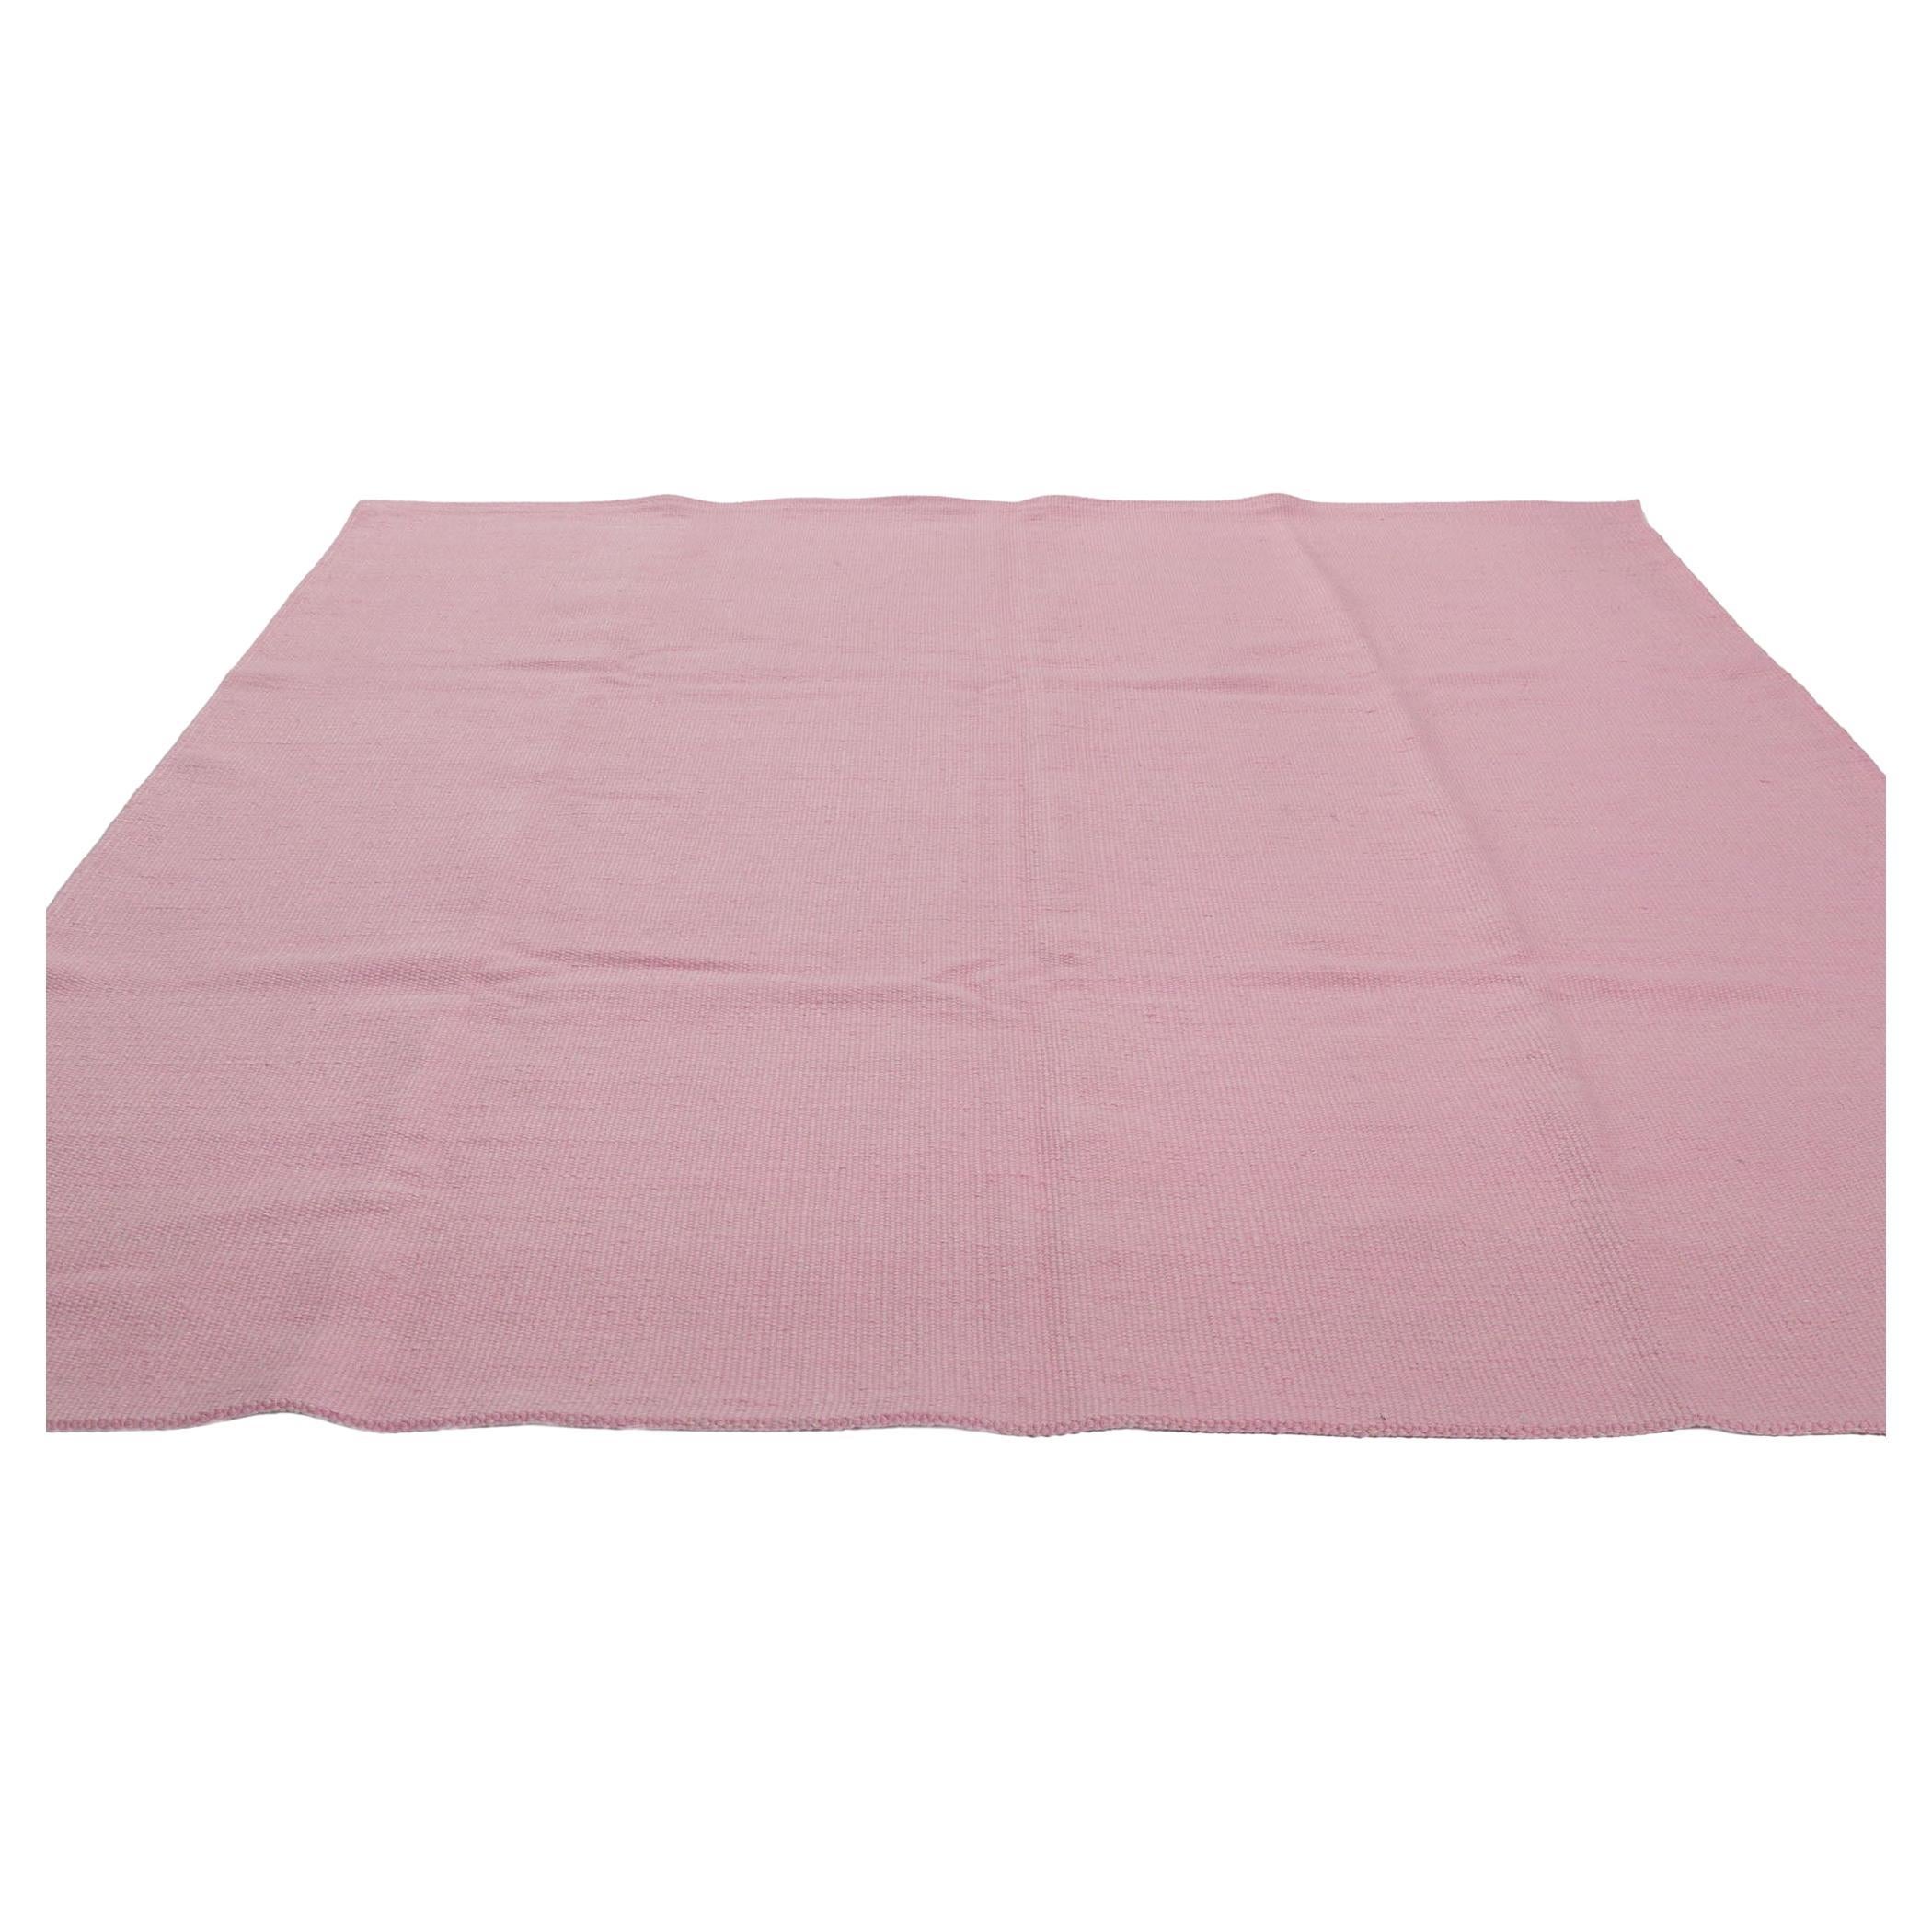 30687 Scandinavian Modern Swedish Inspired Pink Kilim Rug, 07'10 x 09'07. Swedish-style kilim rugs made in India are flat-woven rugs that blend the traditional design aesthetics of Sweden with the craftsmanship of Indian rug making. Featuring